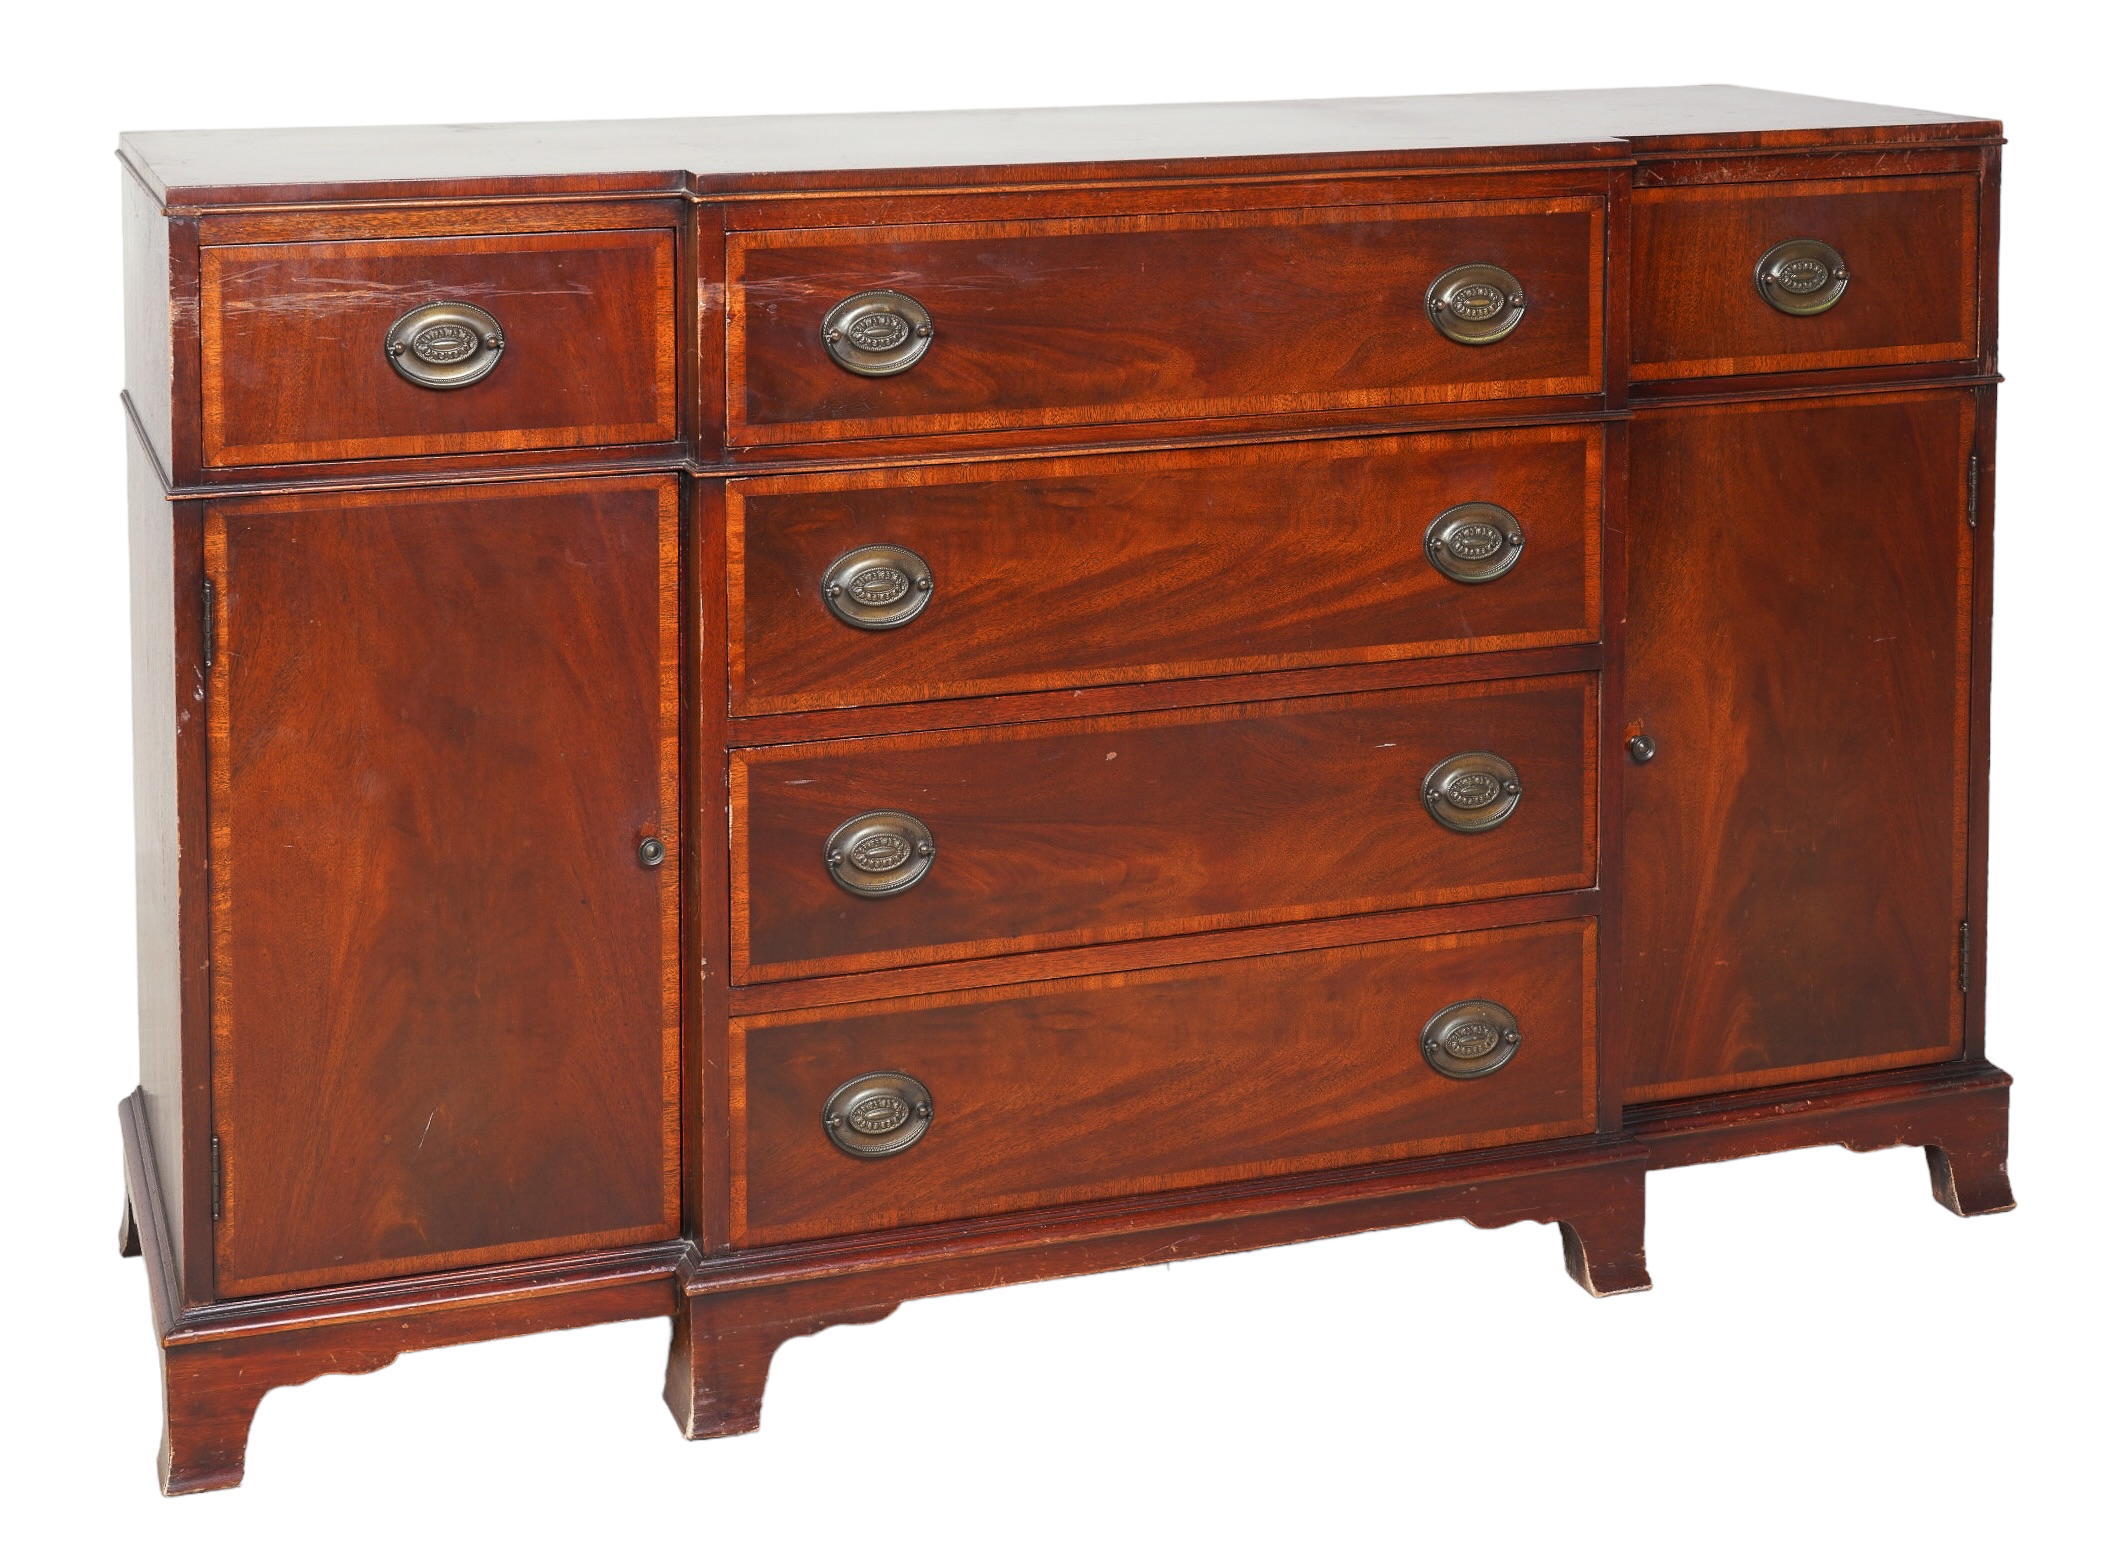 Fancher Furniture Co mahogany sideboard,